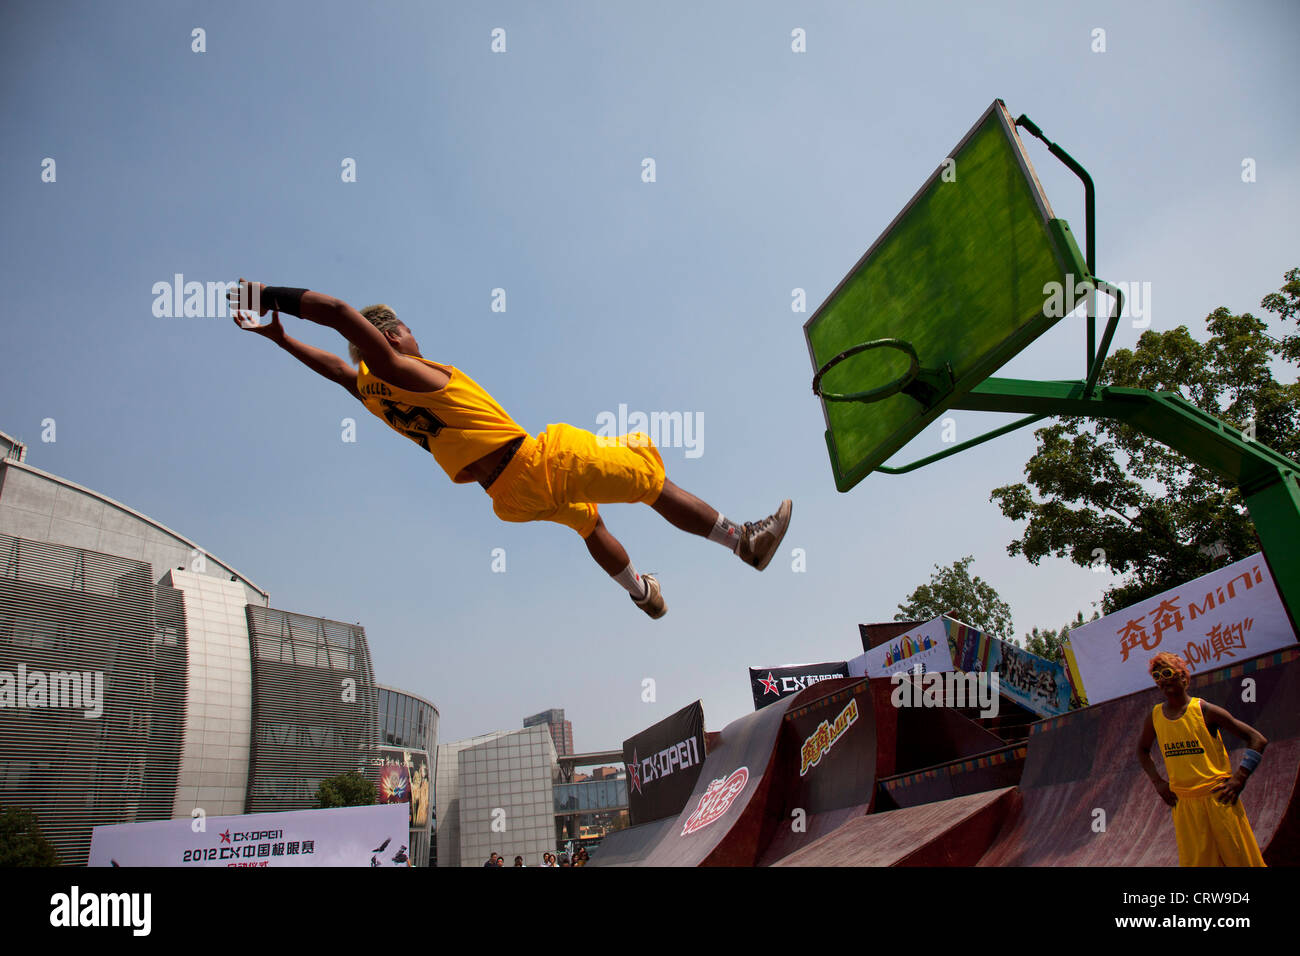 Basketball tricks team perform their slam dunk trick, flying through the  air at Happy Valley amusements park, Beijing, China Stock Photo - Alamy